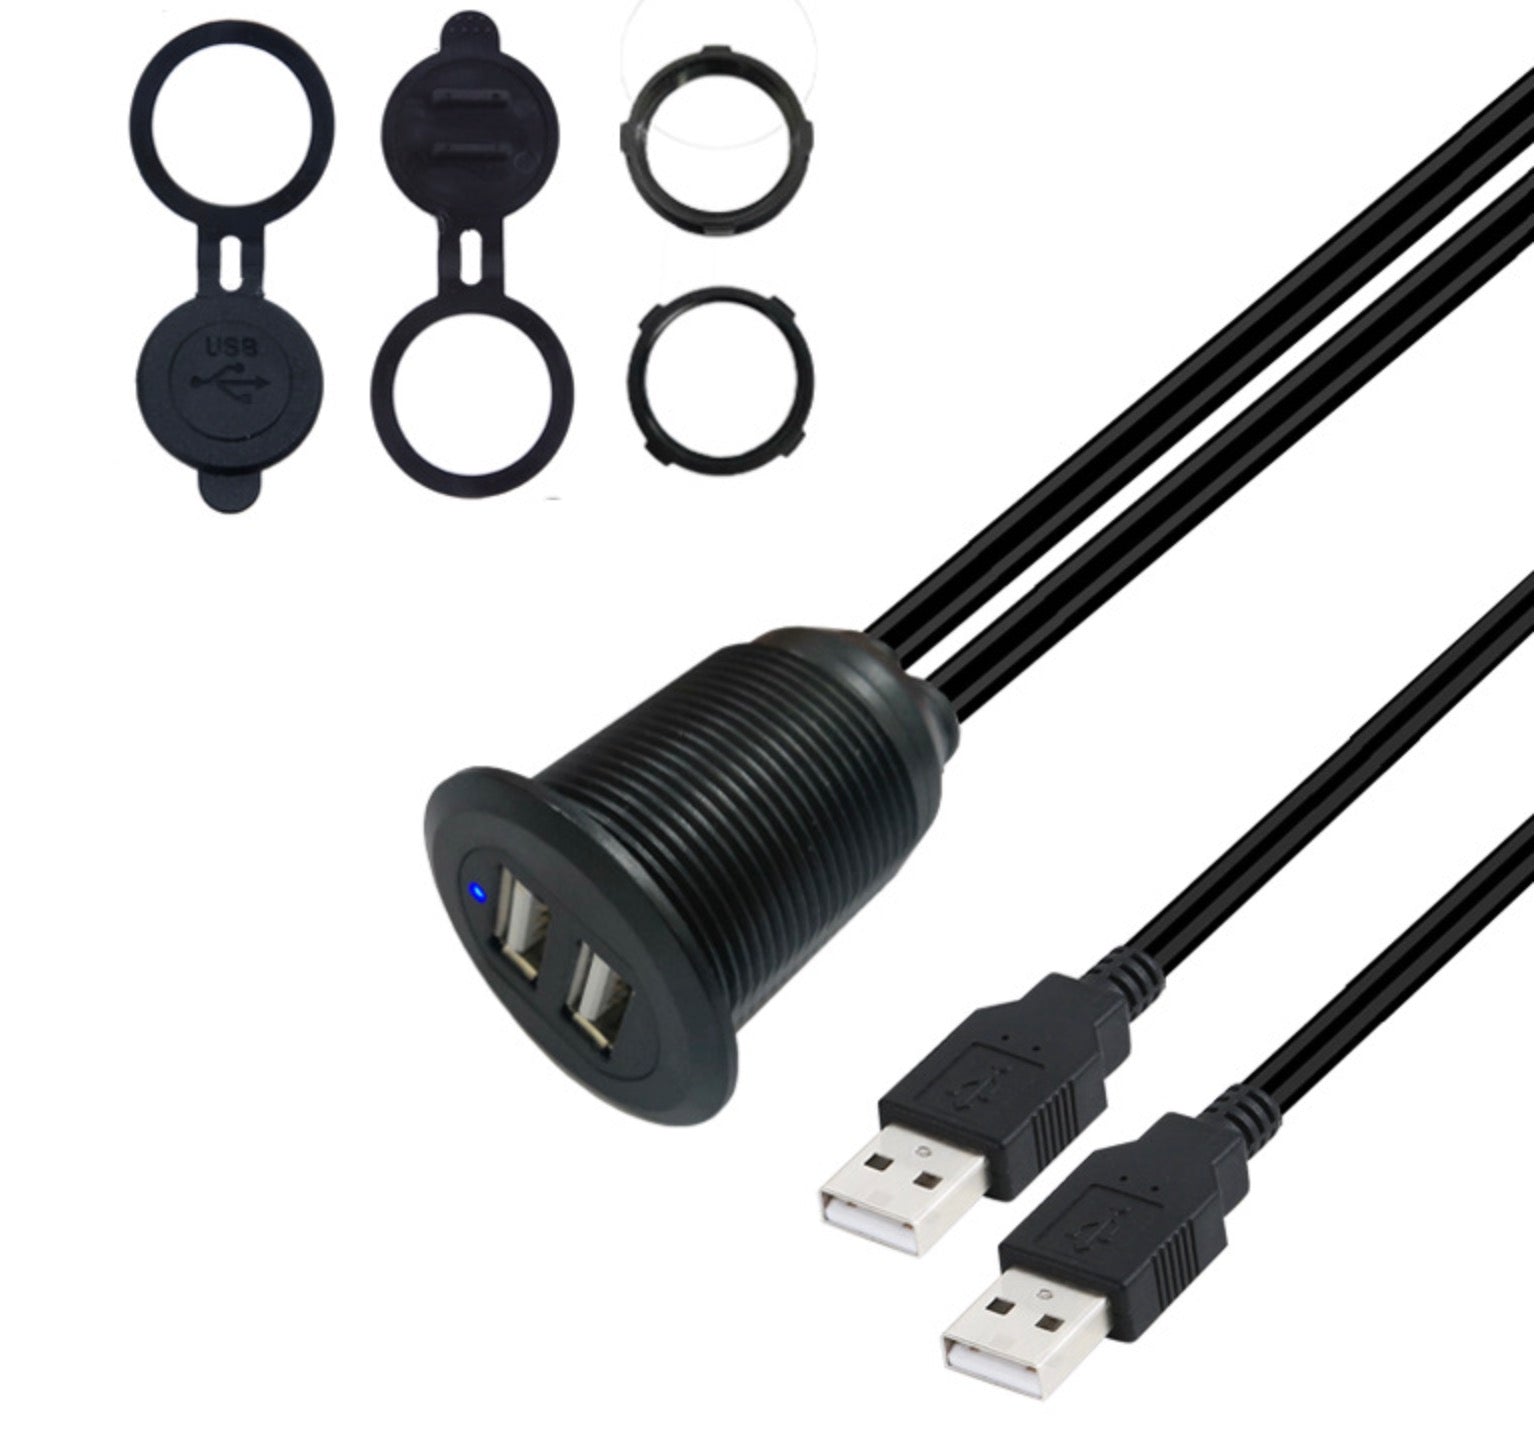 Dual USB-A 2.0 Male to Dual Female Extension Cable for Vehicles 1m